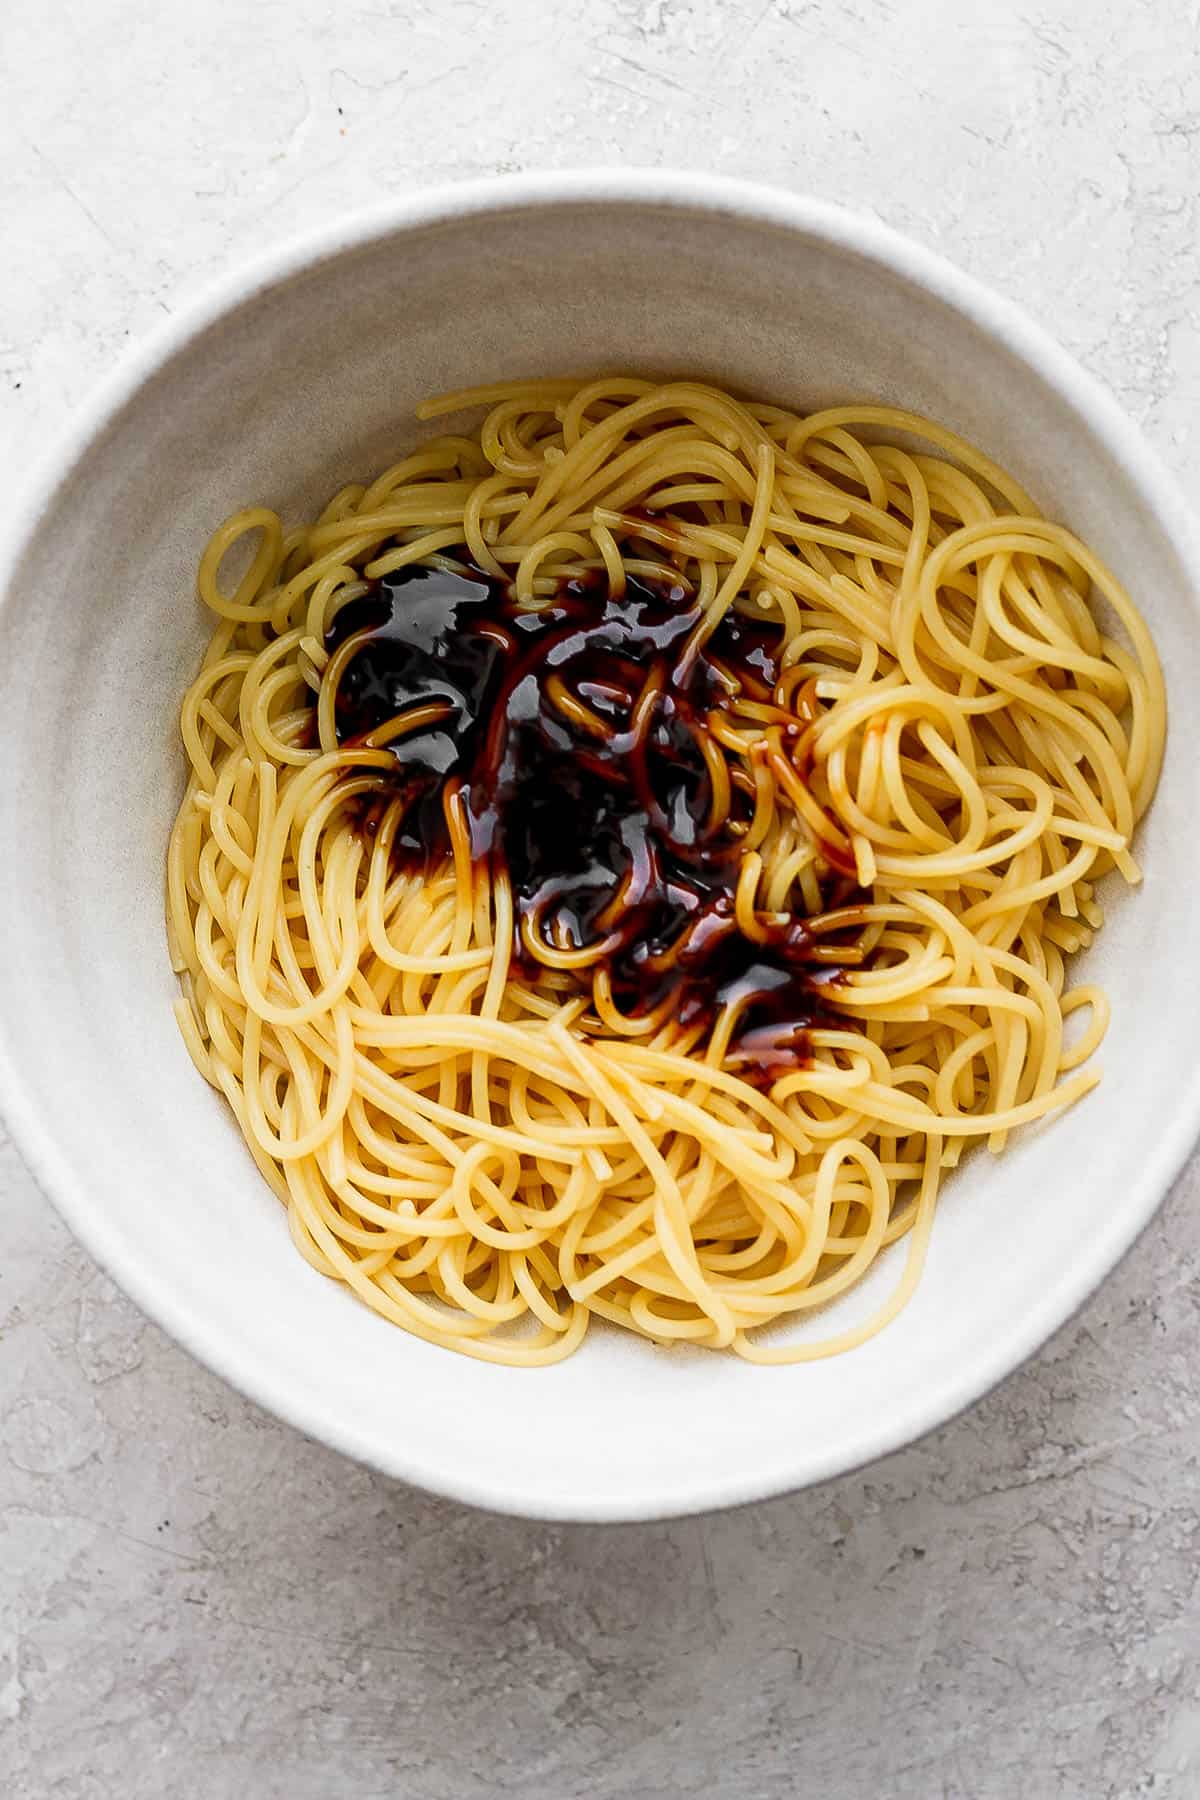 Cooked noodles in a large bowl with teriyaki sauce on top.